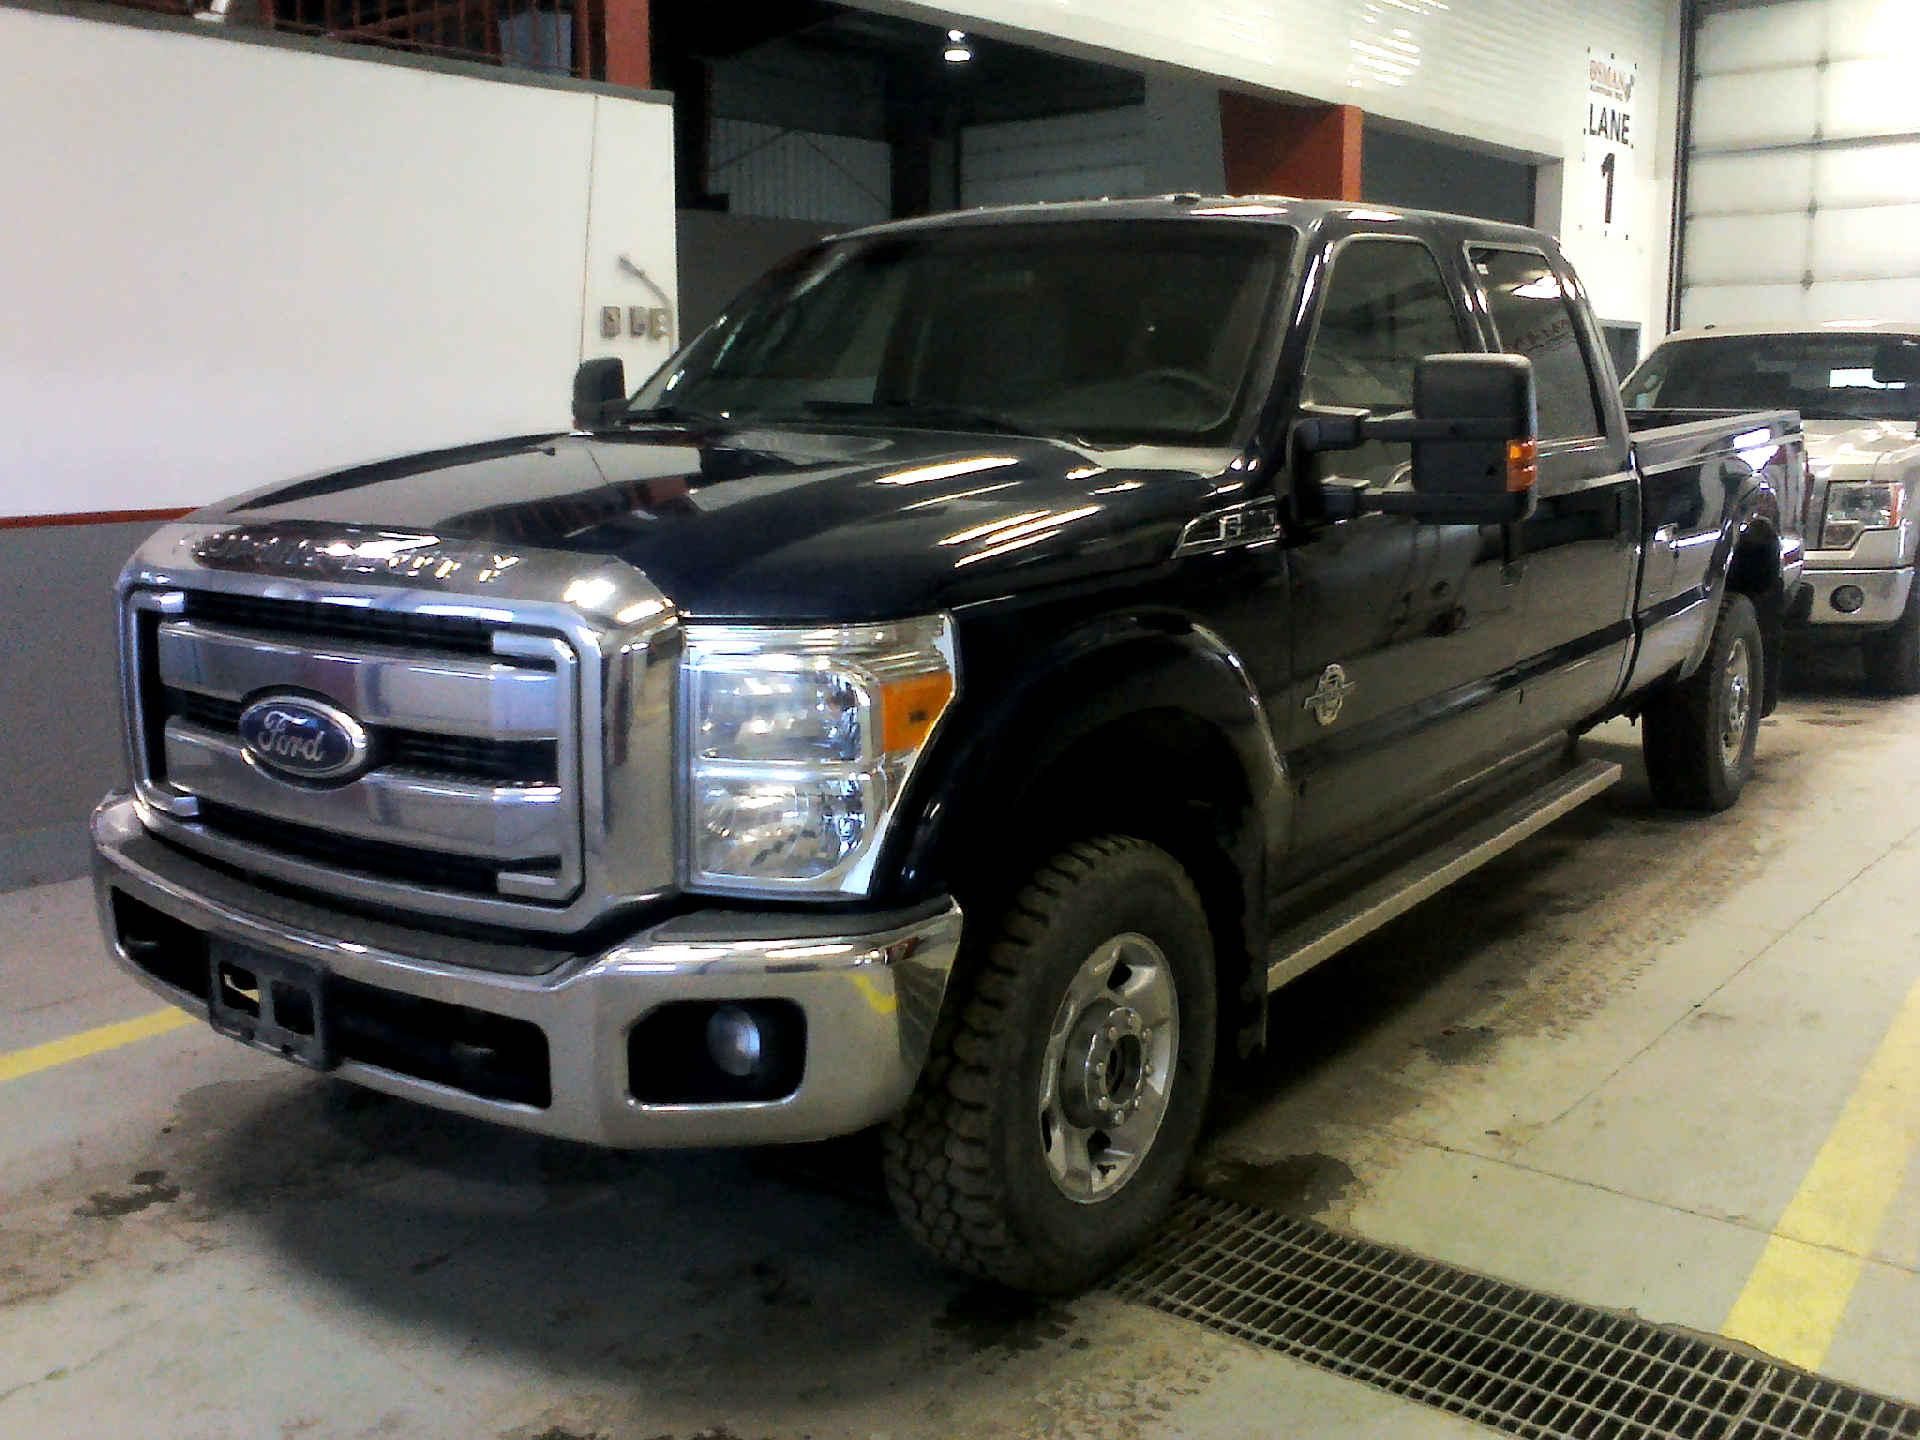 2012 FORD F-350 SD XLT CREW CAB 4WD 6.7L V8 OHV 16V DIESEL AUTOMATIC SN:1FT8W3BT2CEA27072 OPTIONS:AC